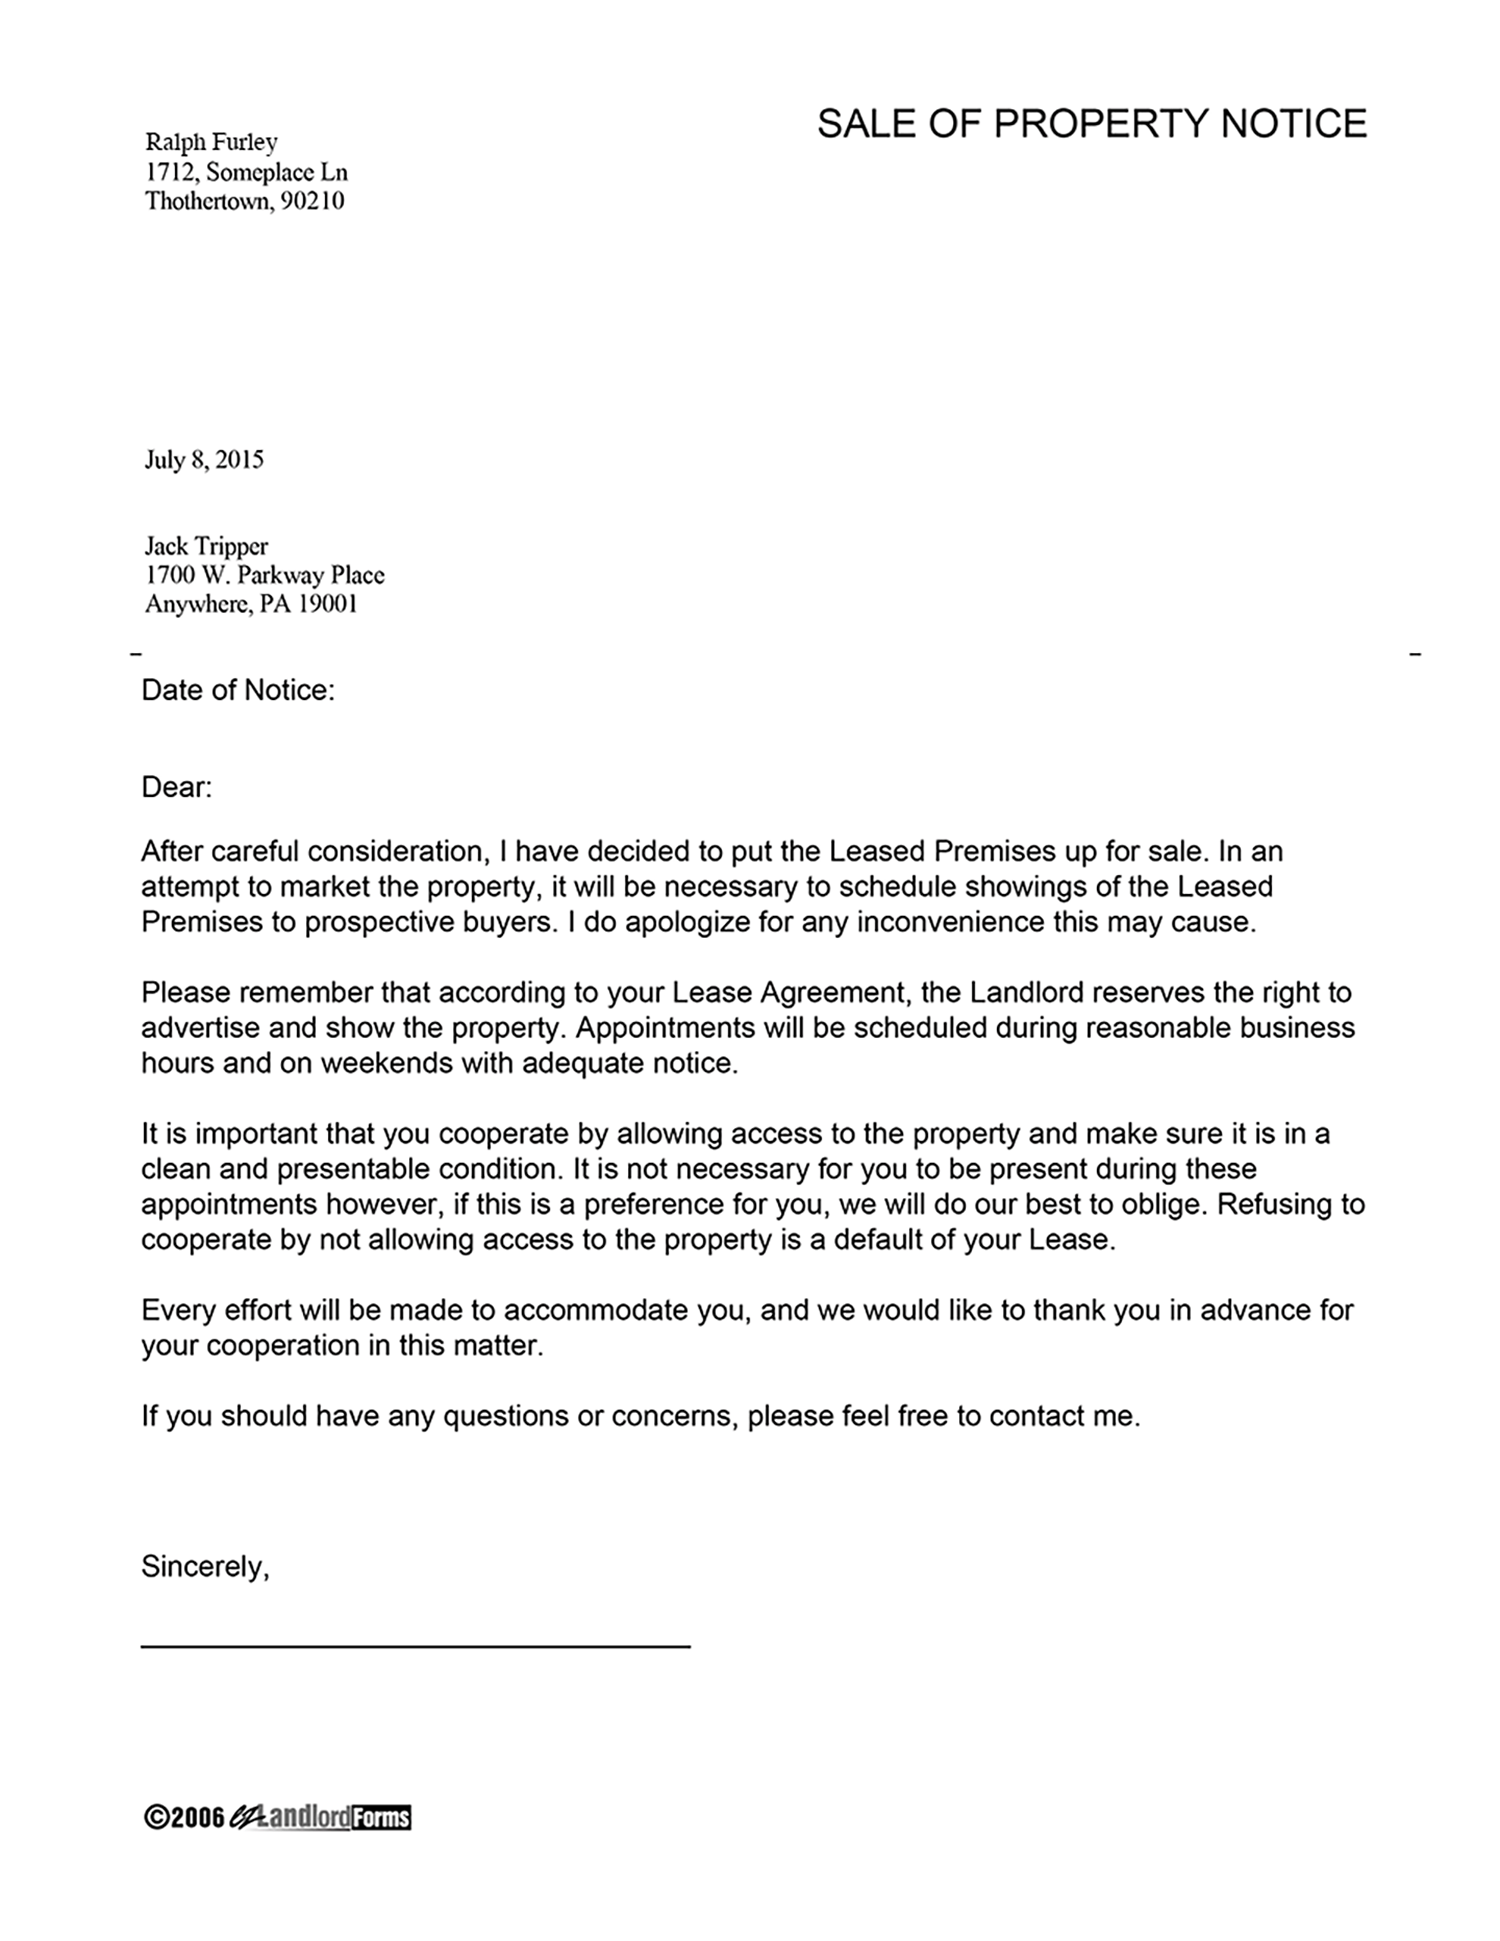 Change Of Property Manager Letter To Tenants from www.ezlandlordforms.com